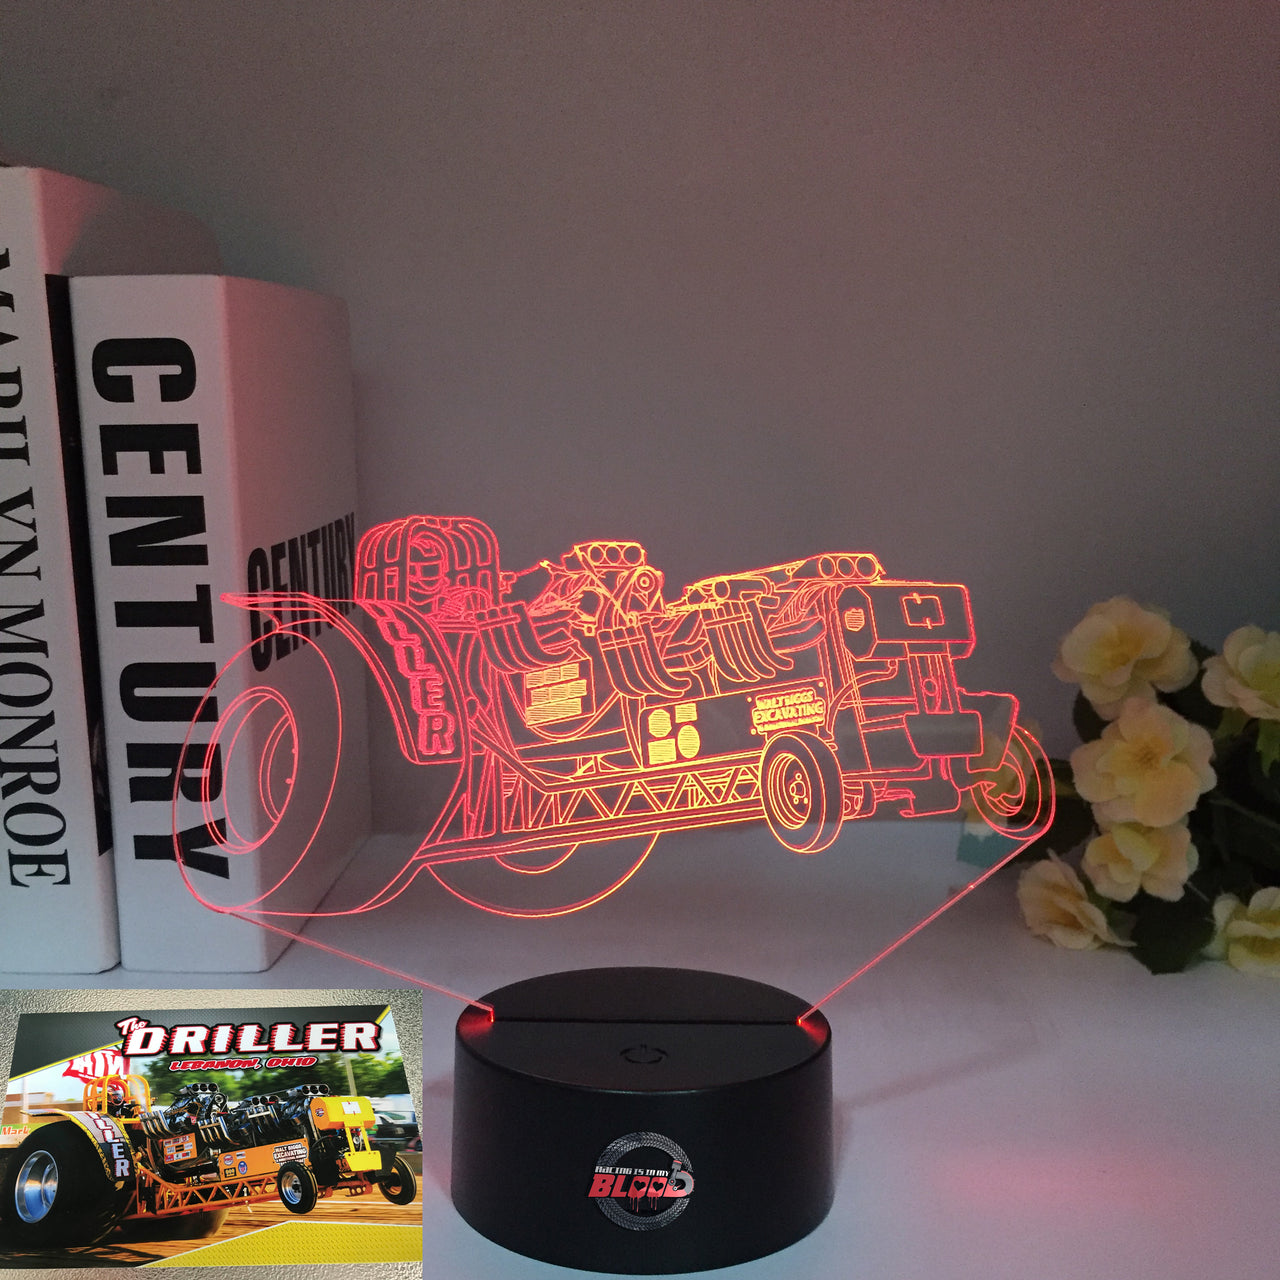 Dragster "The Driller" Led Lamps